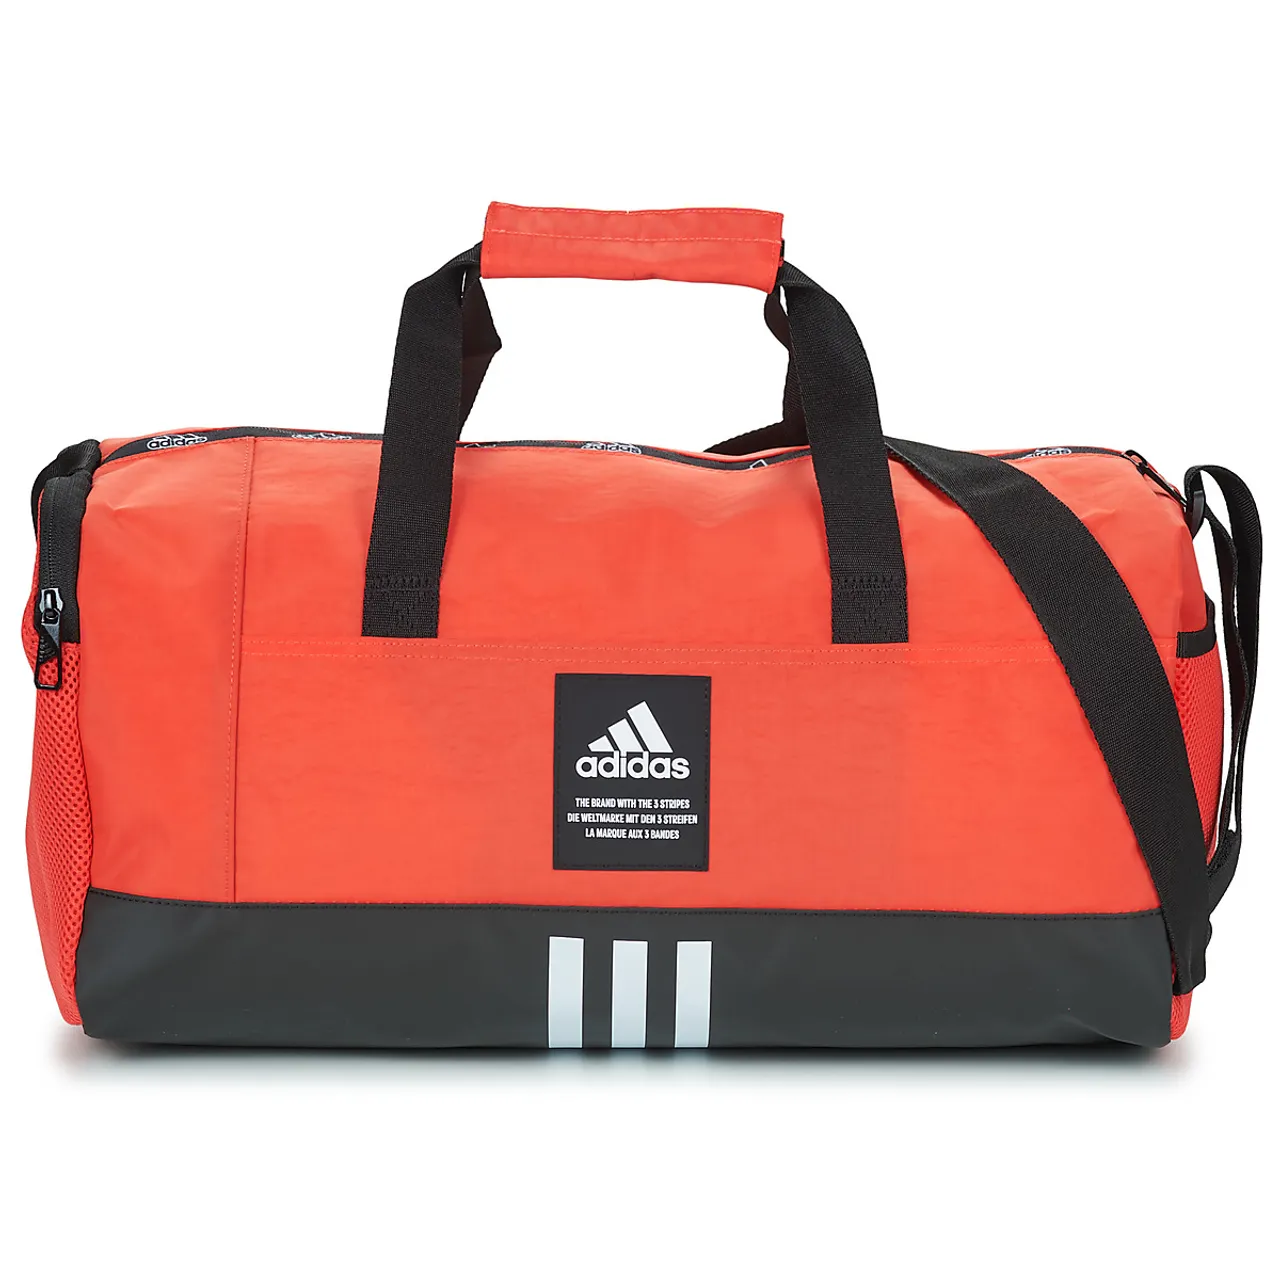 adidas  4ATHLTS DUF S  women's Sports bag in Red